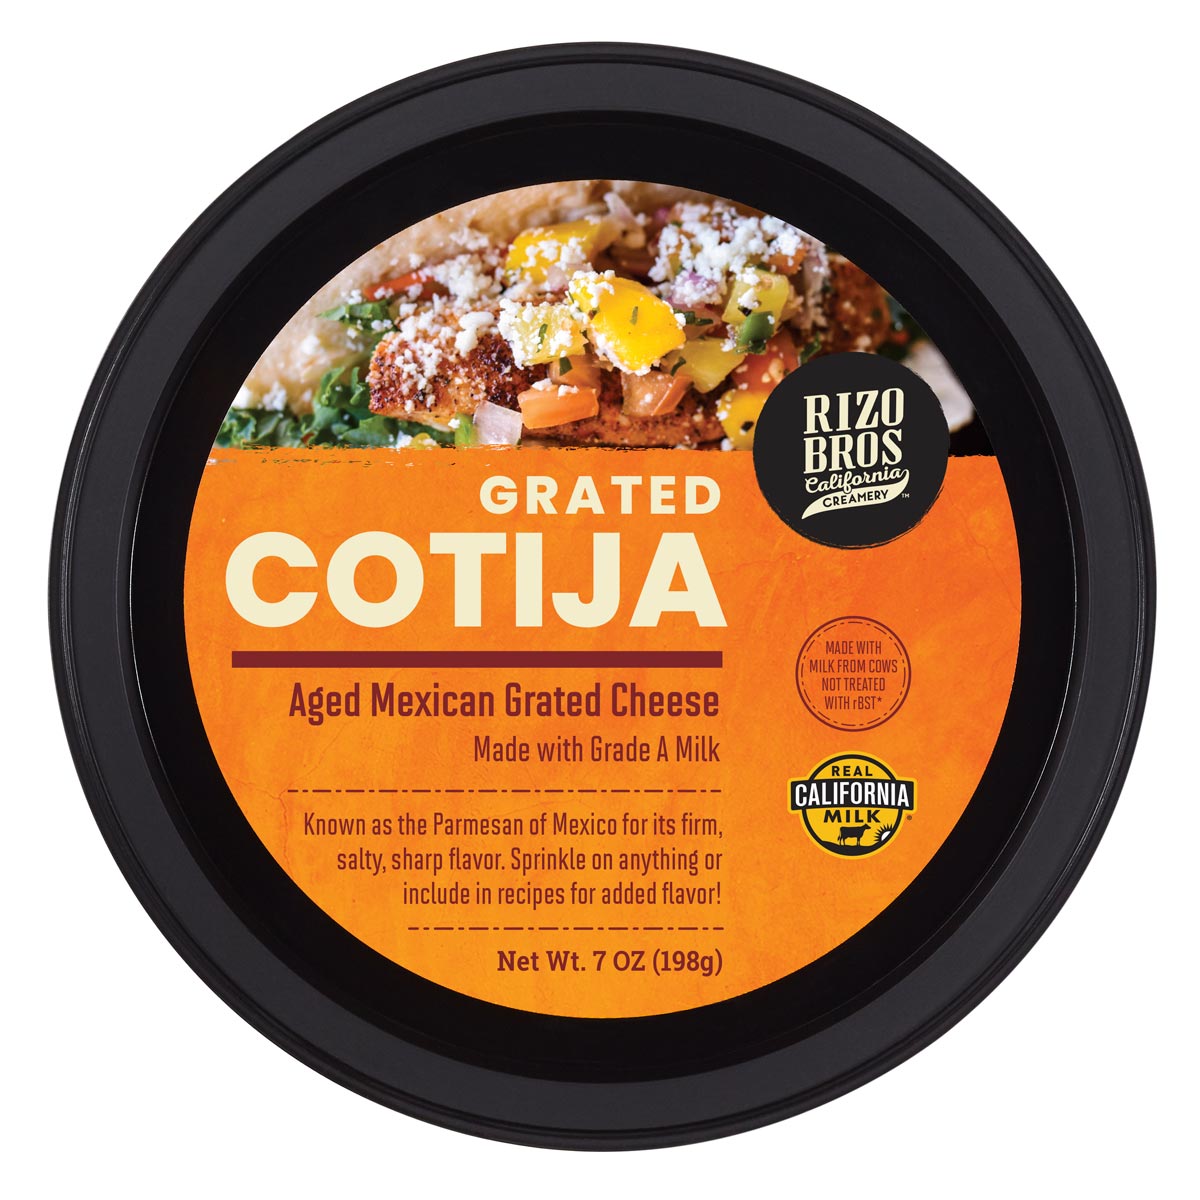 Grated Cotija Packaging